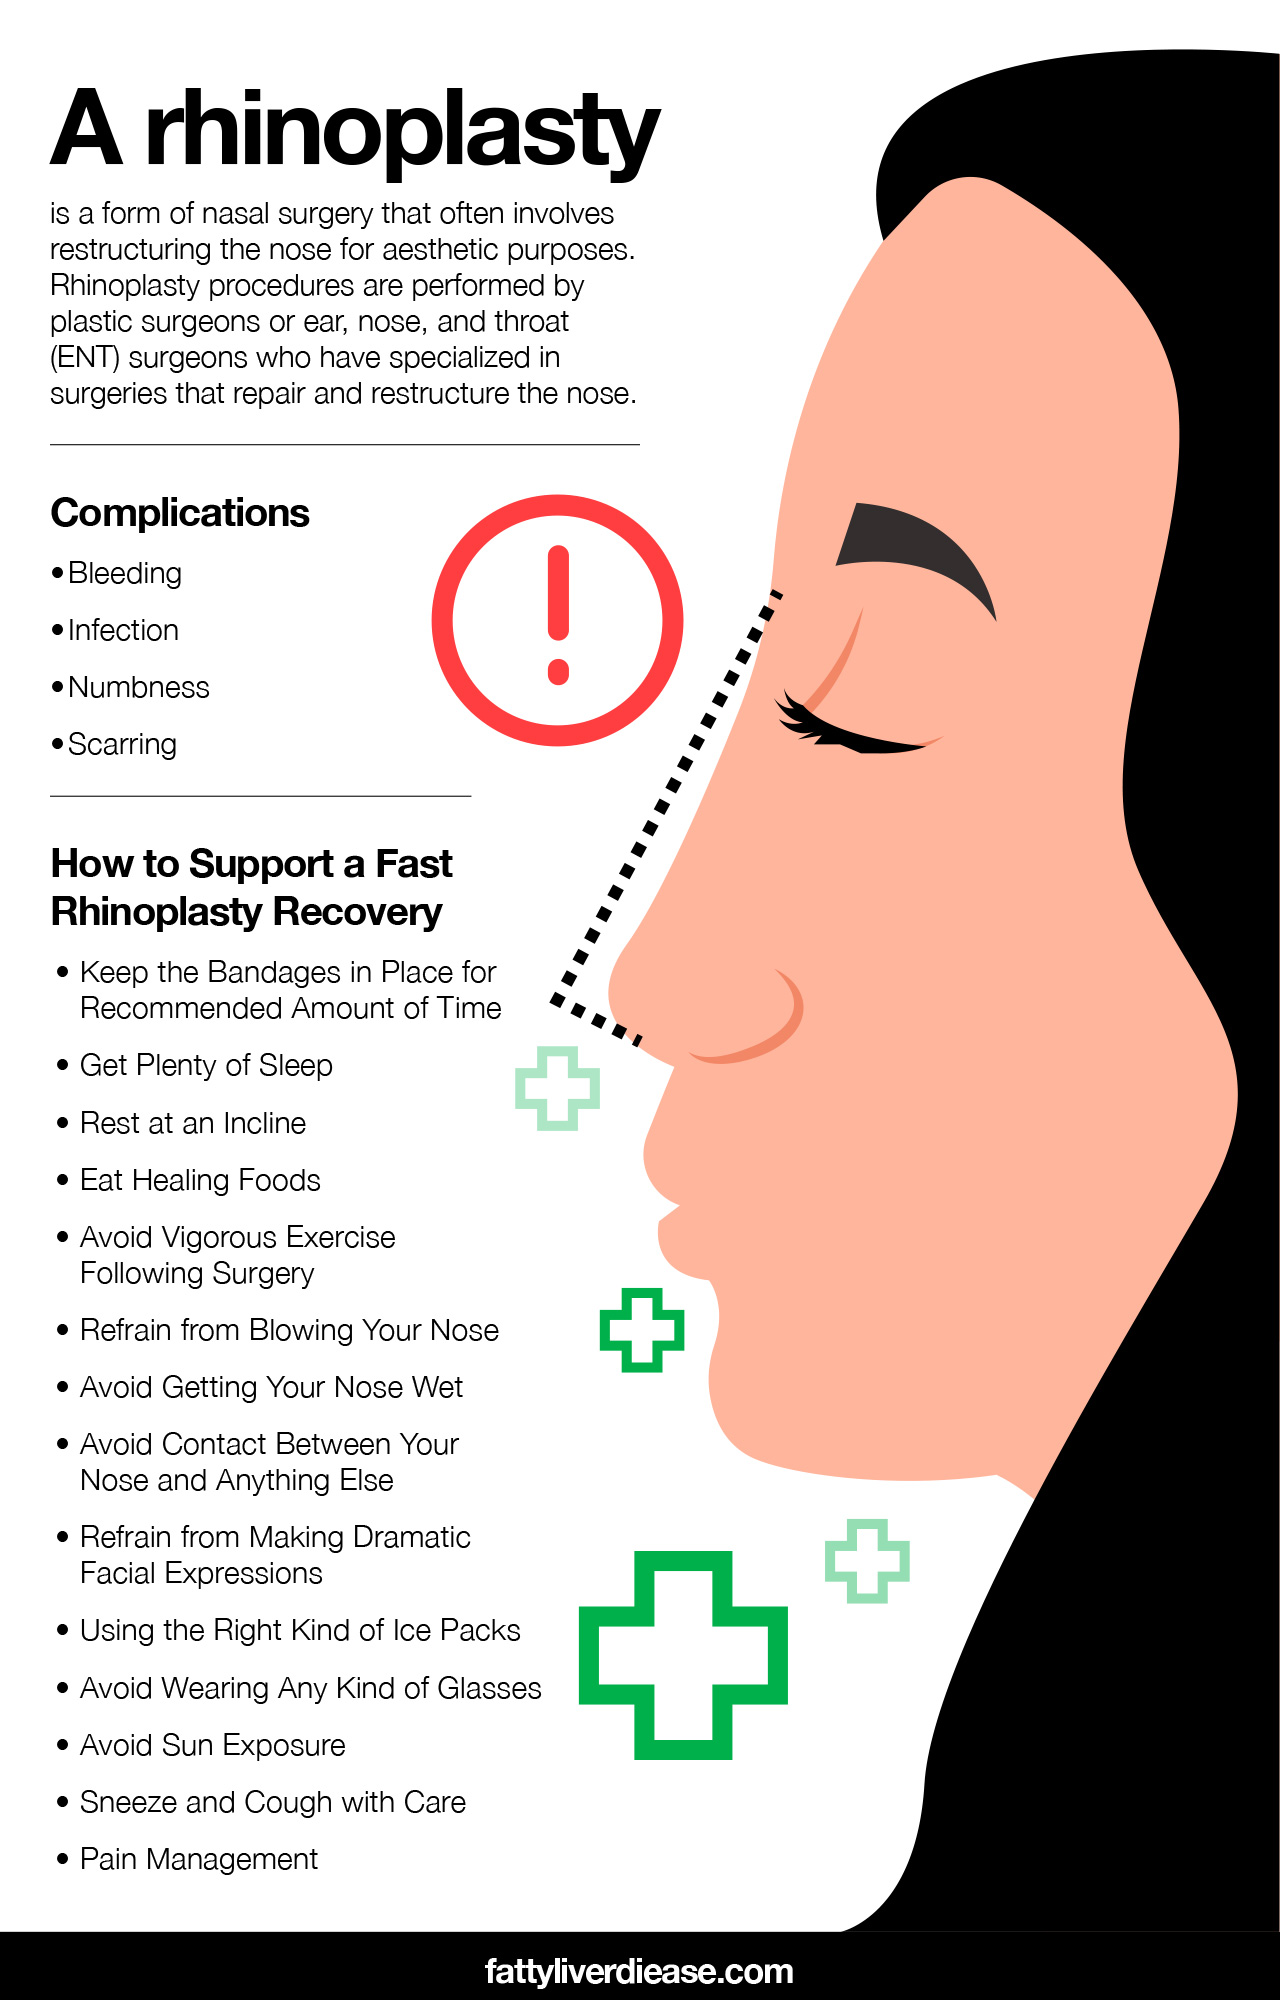 How to Support a Fast Rhinoplasty Recovery